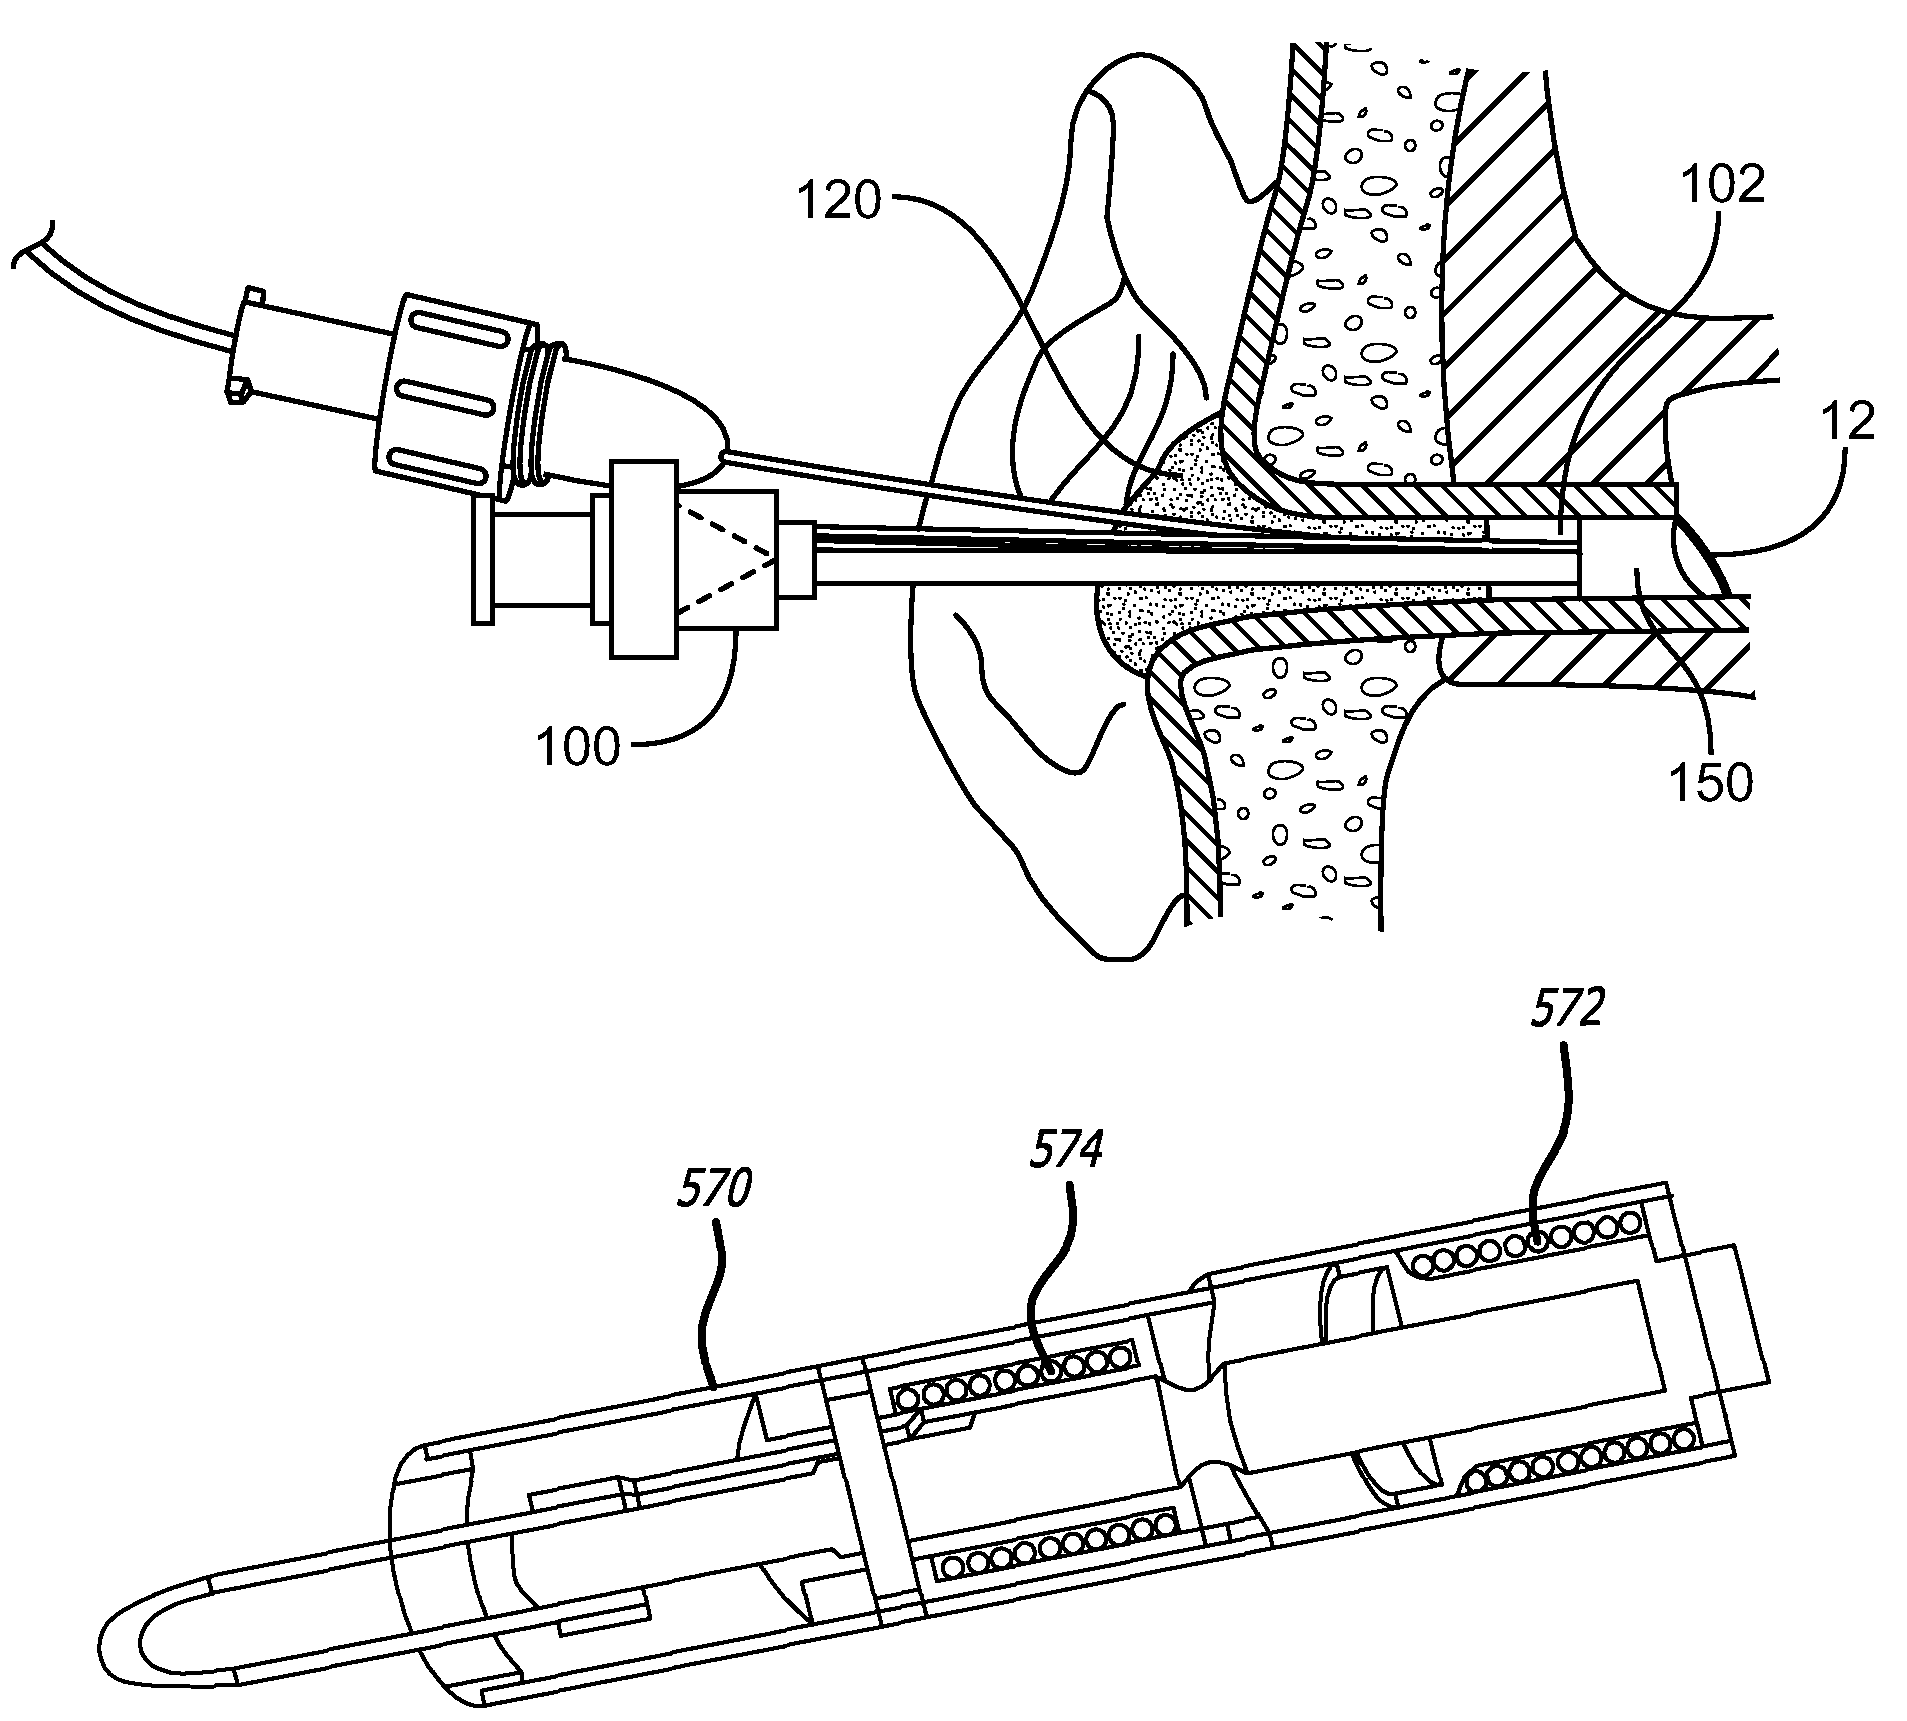 System and method for the simultaneous automated bilateral delivery of pressure equalization tubes